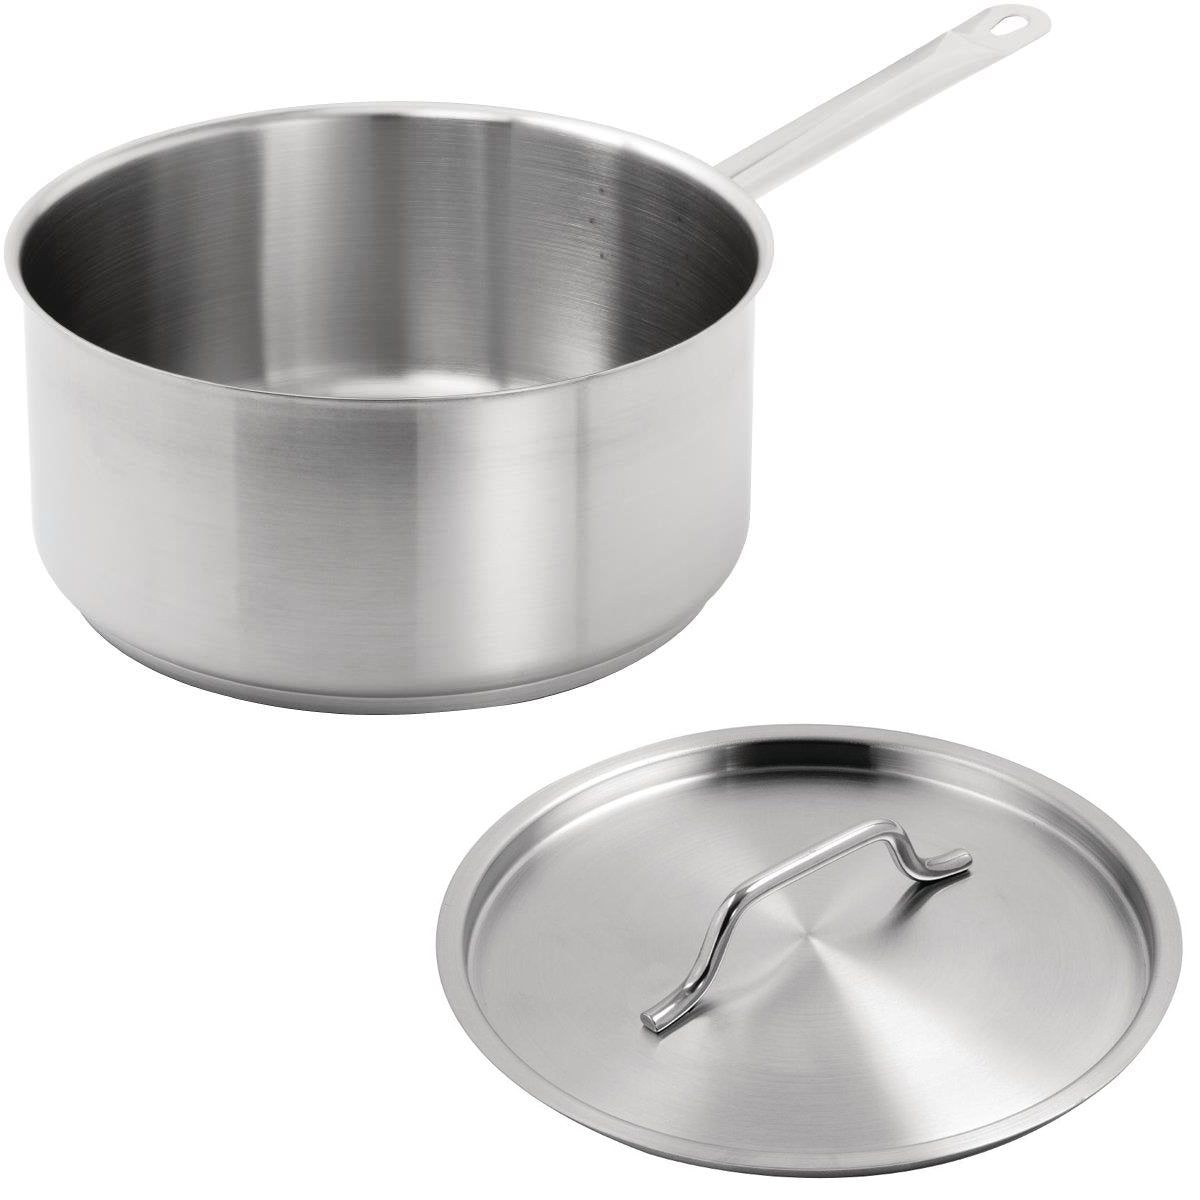 Professional Saucepan with Lid Stainless steel 3.9 litres Rental